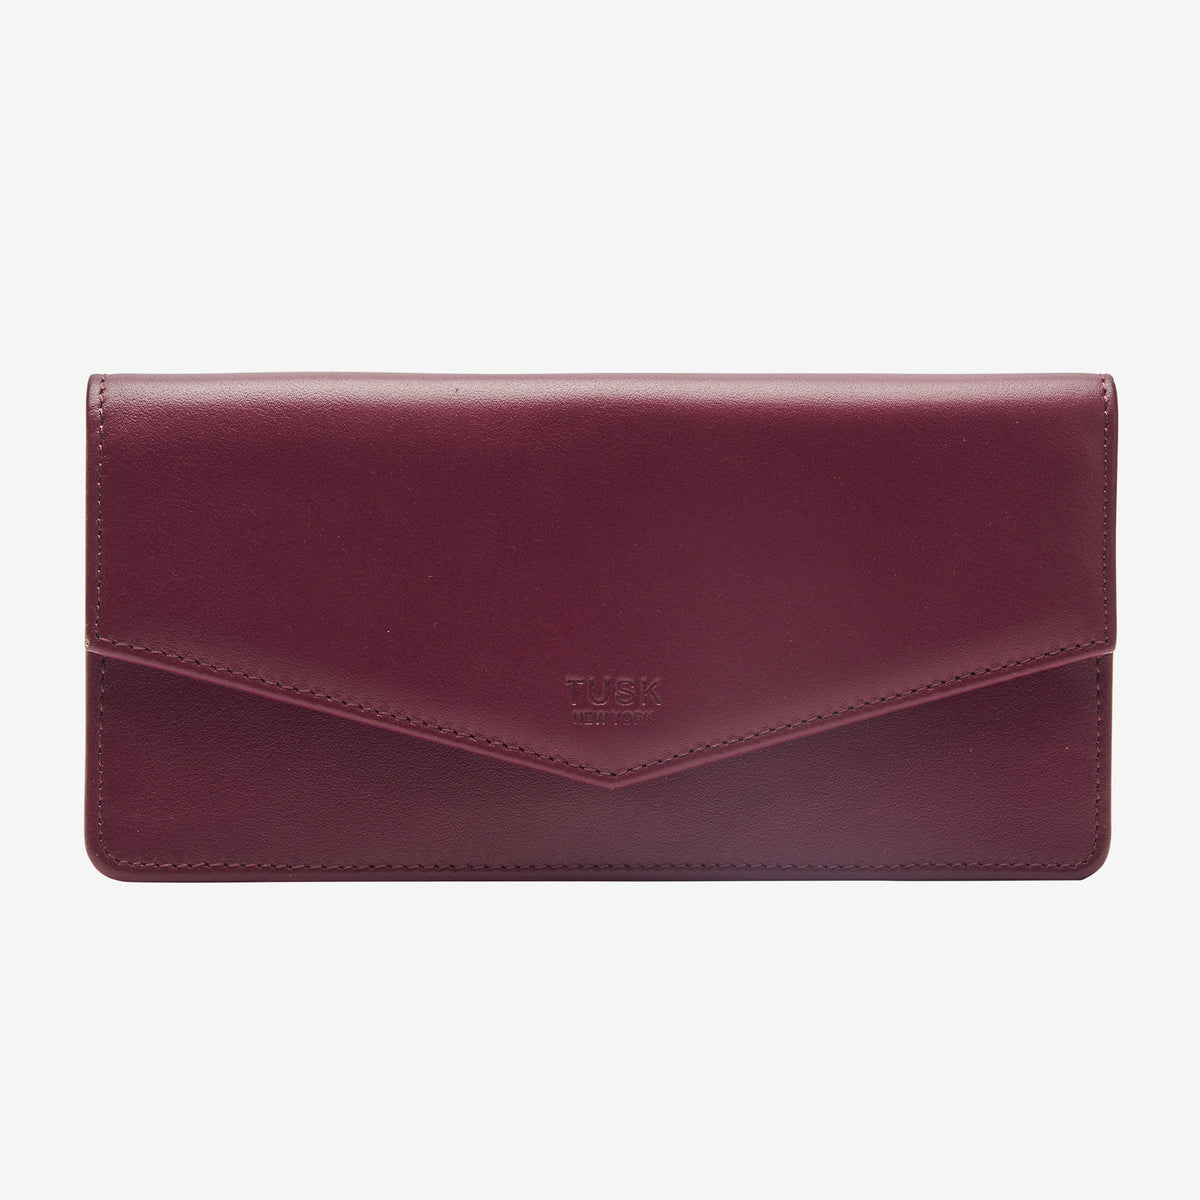 tusk-434-leather-clutch-wallet-oxblood-front